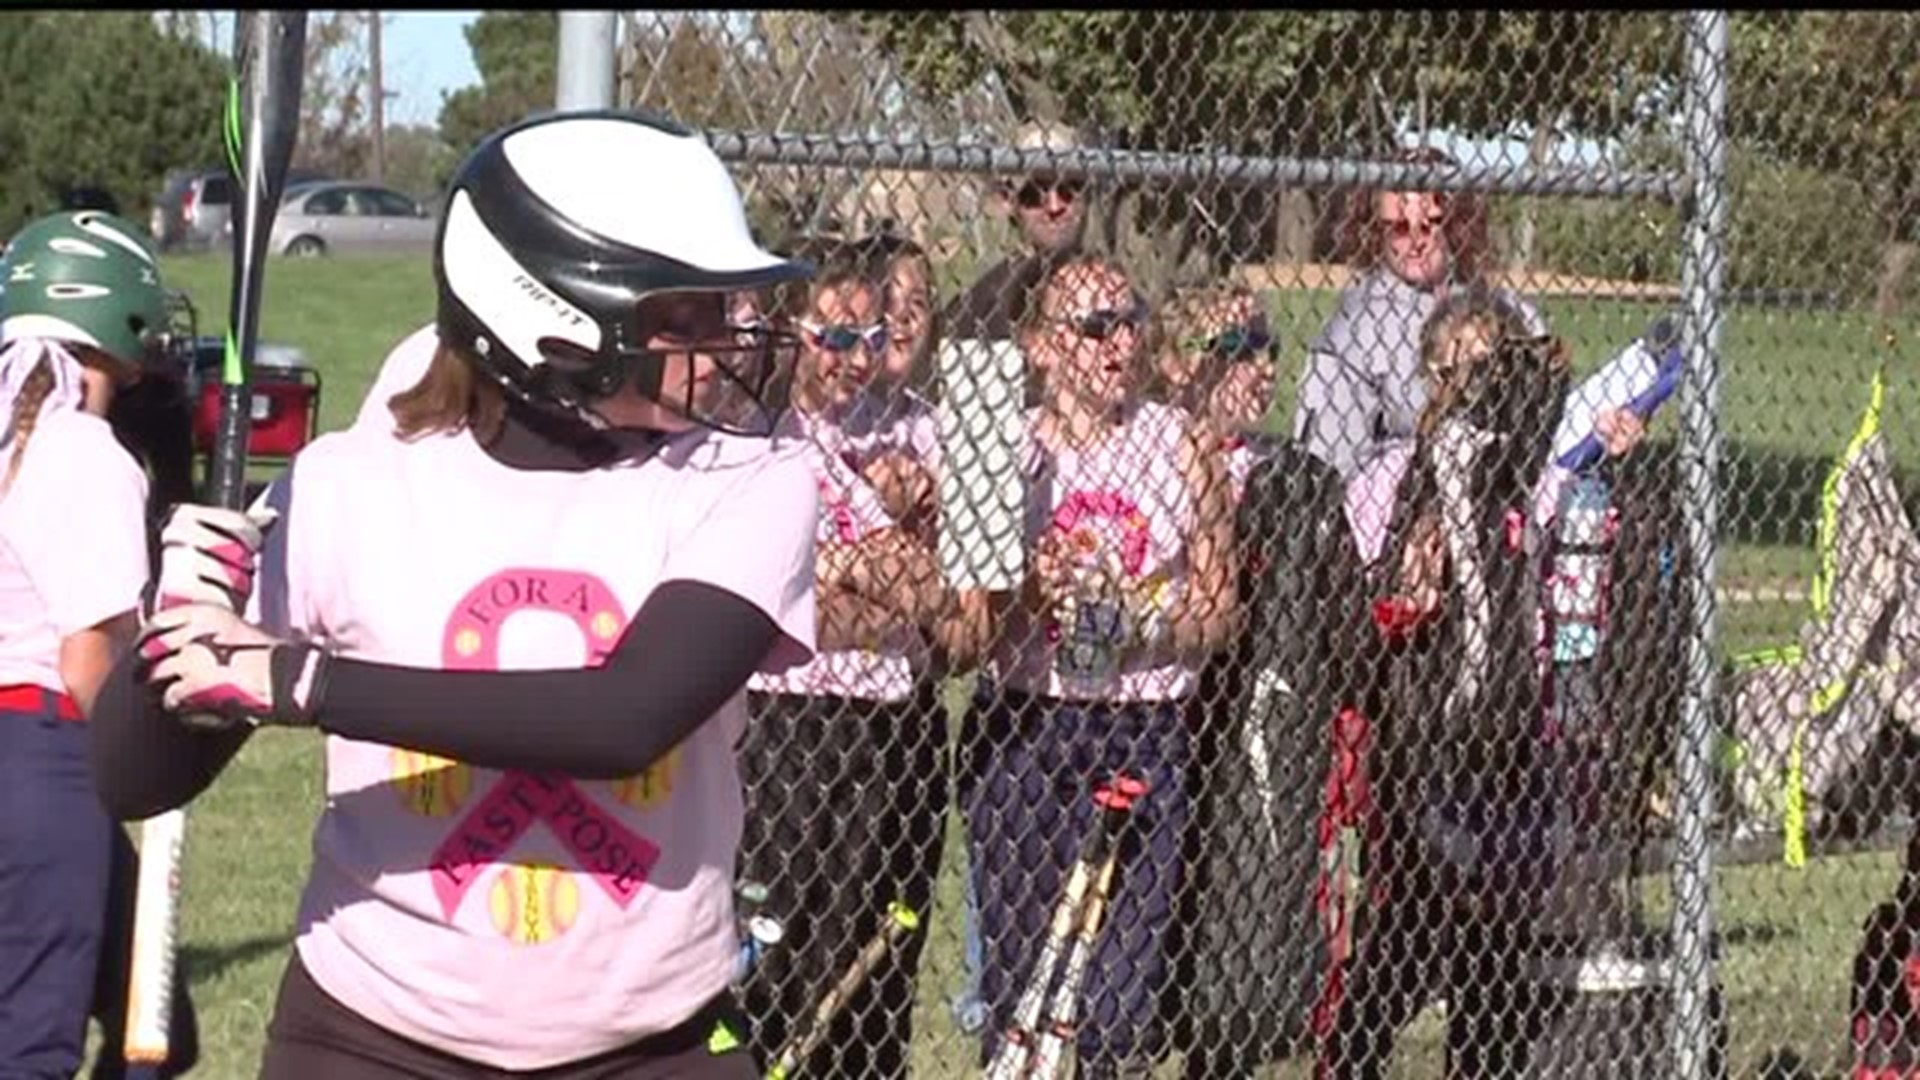 Softball players in Shrewsbury pitch for a purpose